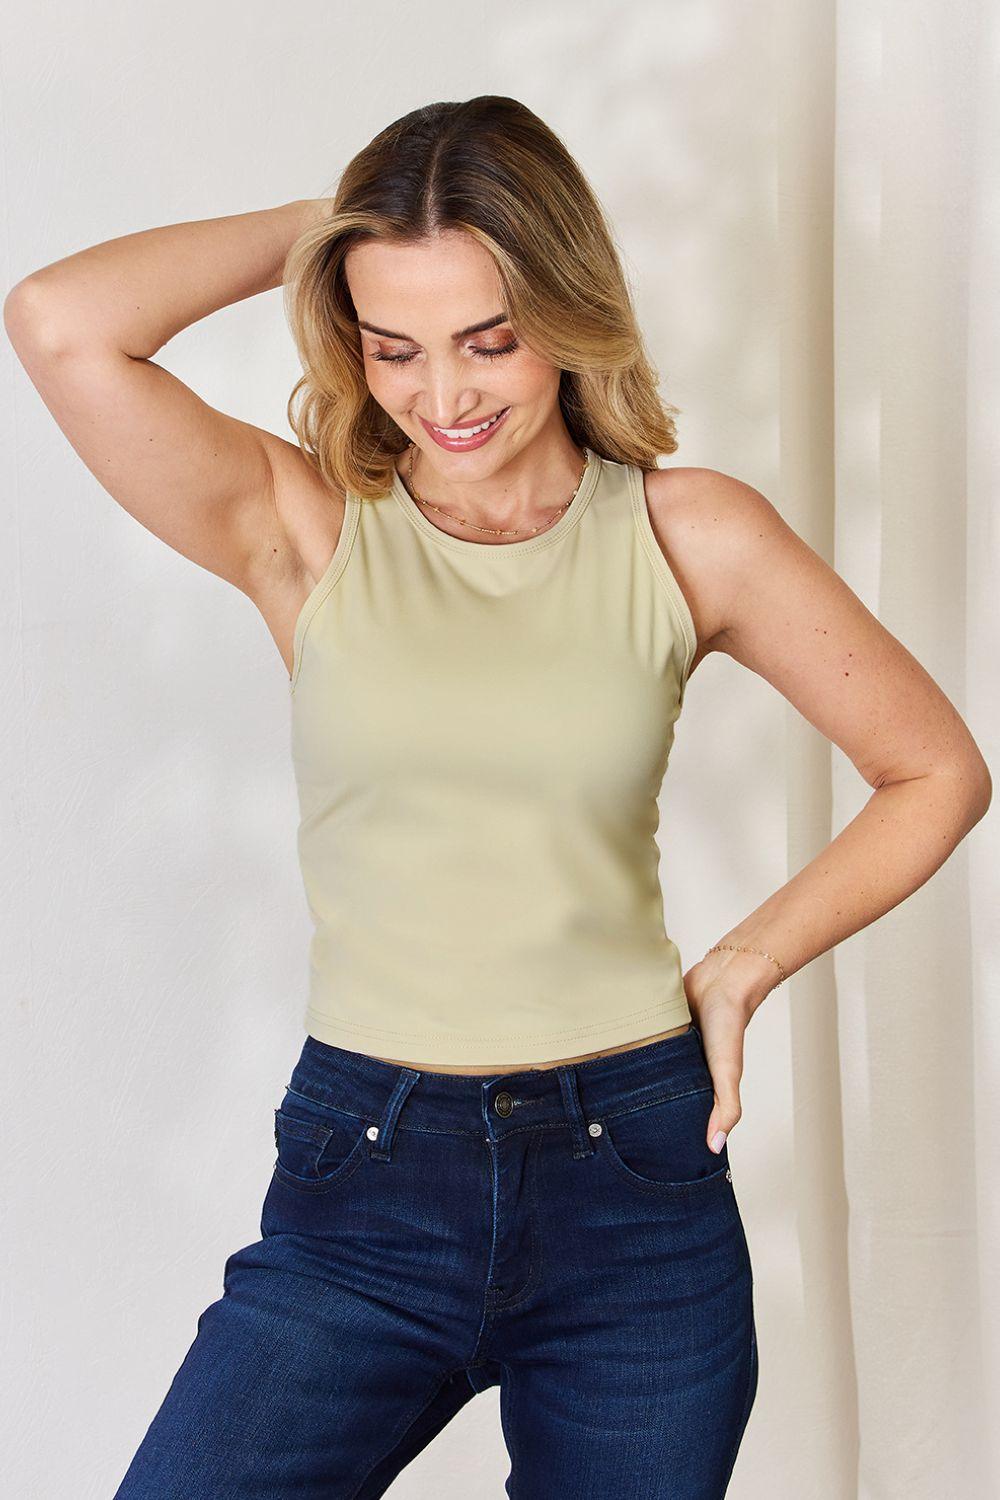 a woman in a tank top is posing for a picture